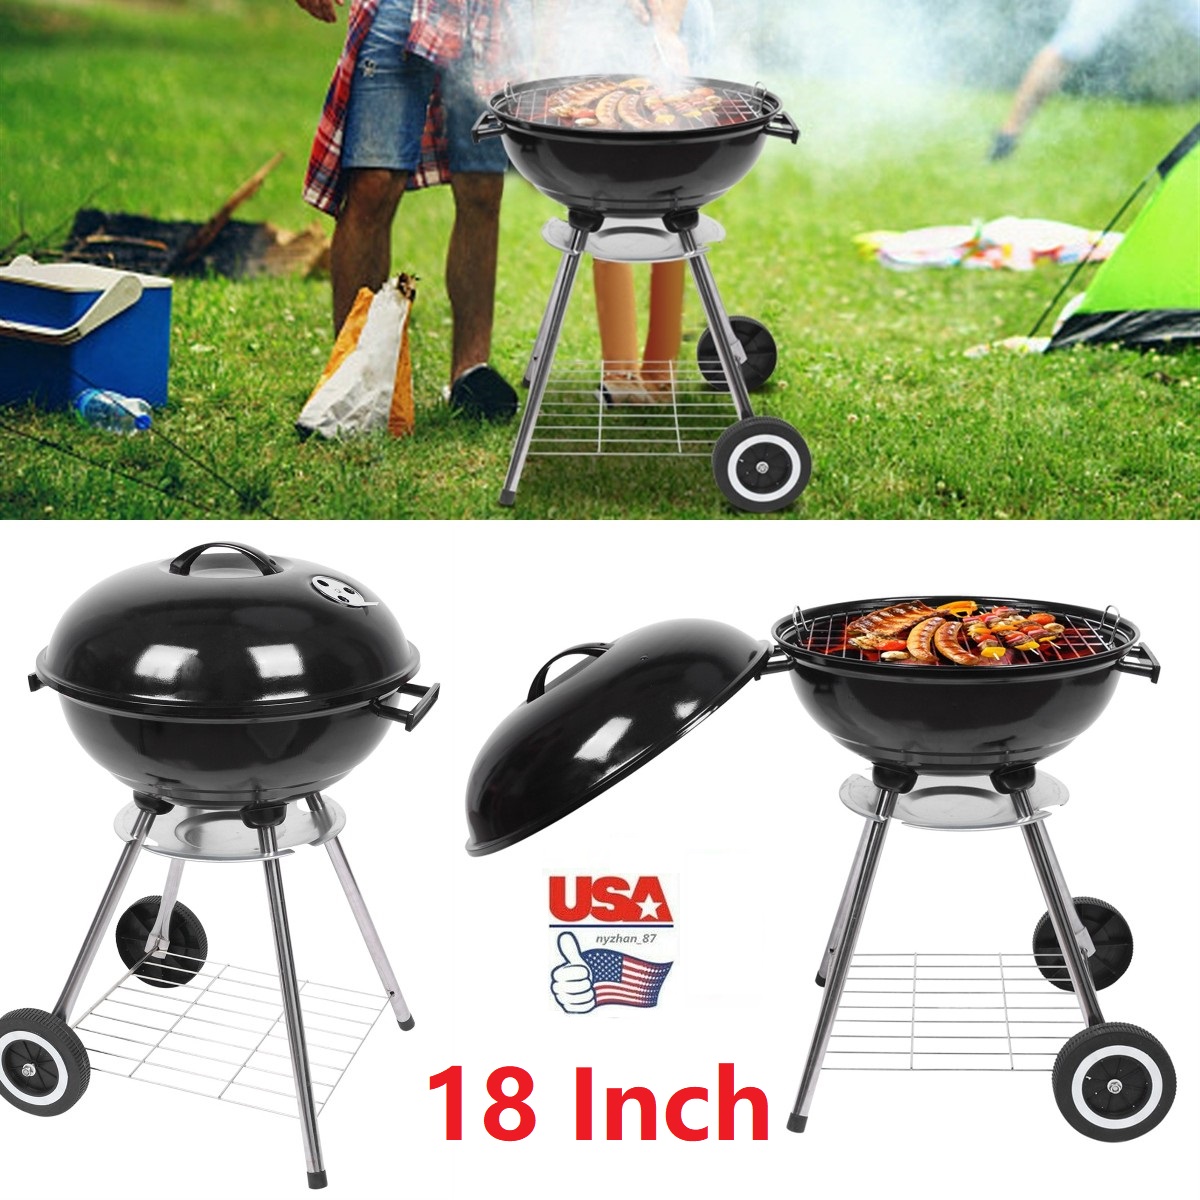 Goorabbit 18 Inch Charcoal Grill for Outdoor Camping, High Round Charcoal Barbecue Grill with Thickened Grilling Bowl for Picnic Small BBQ Kettle Patio with 2 Durable Wheels,Black - image 1 of 14